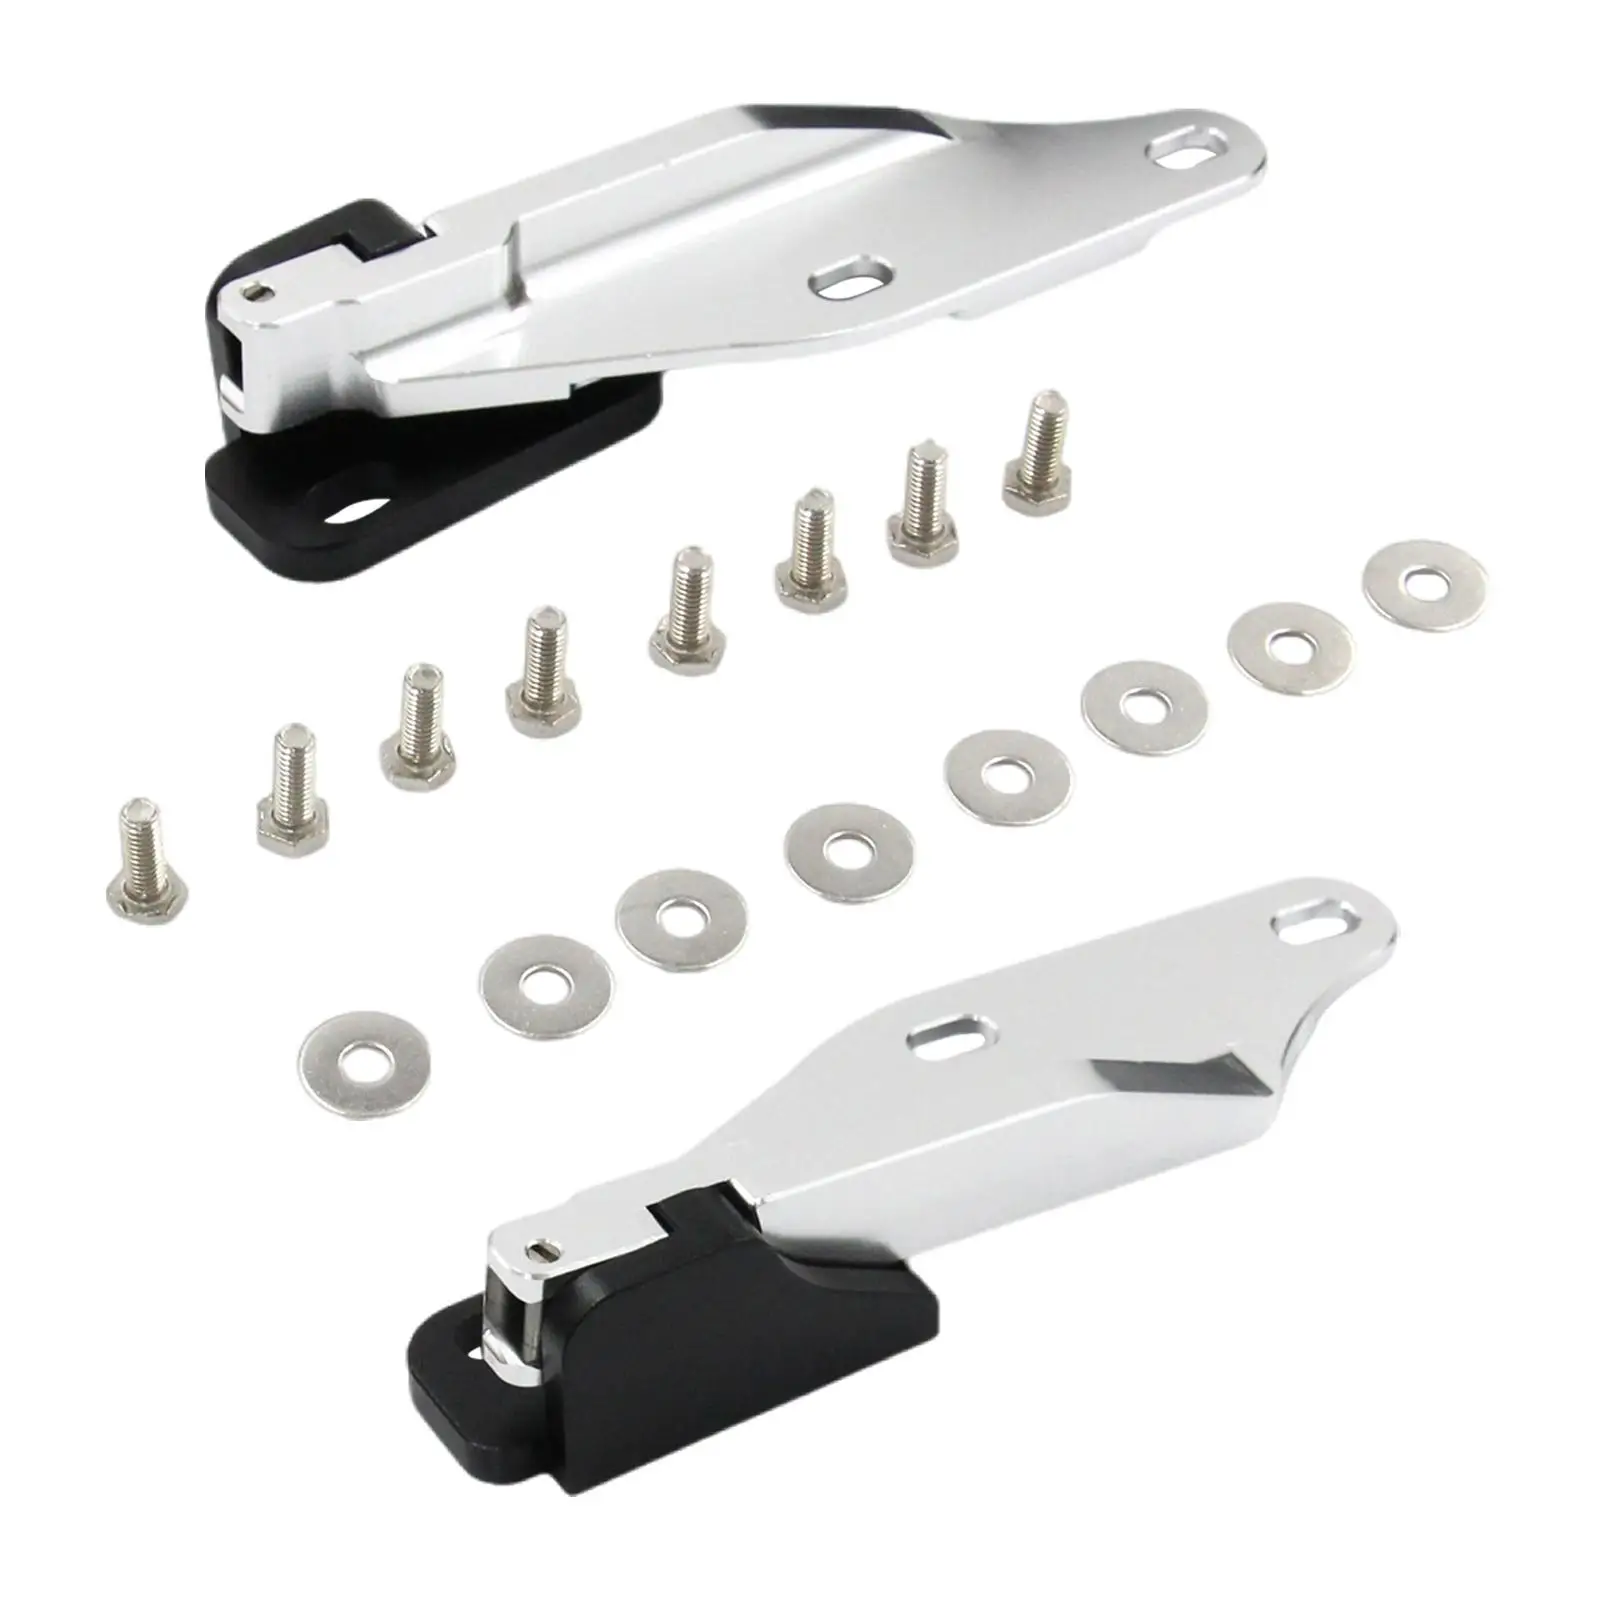 2 Pieces Quick Release Hood Hinge Professional Sturdy Automotive Hood Hinge for